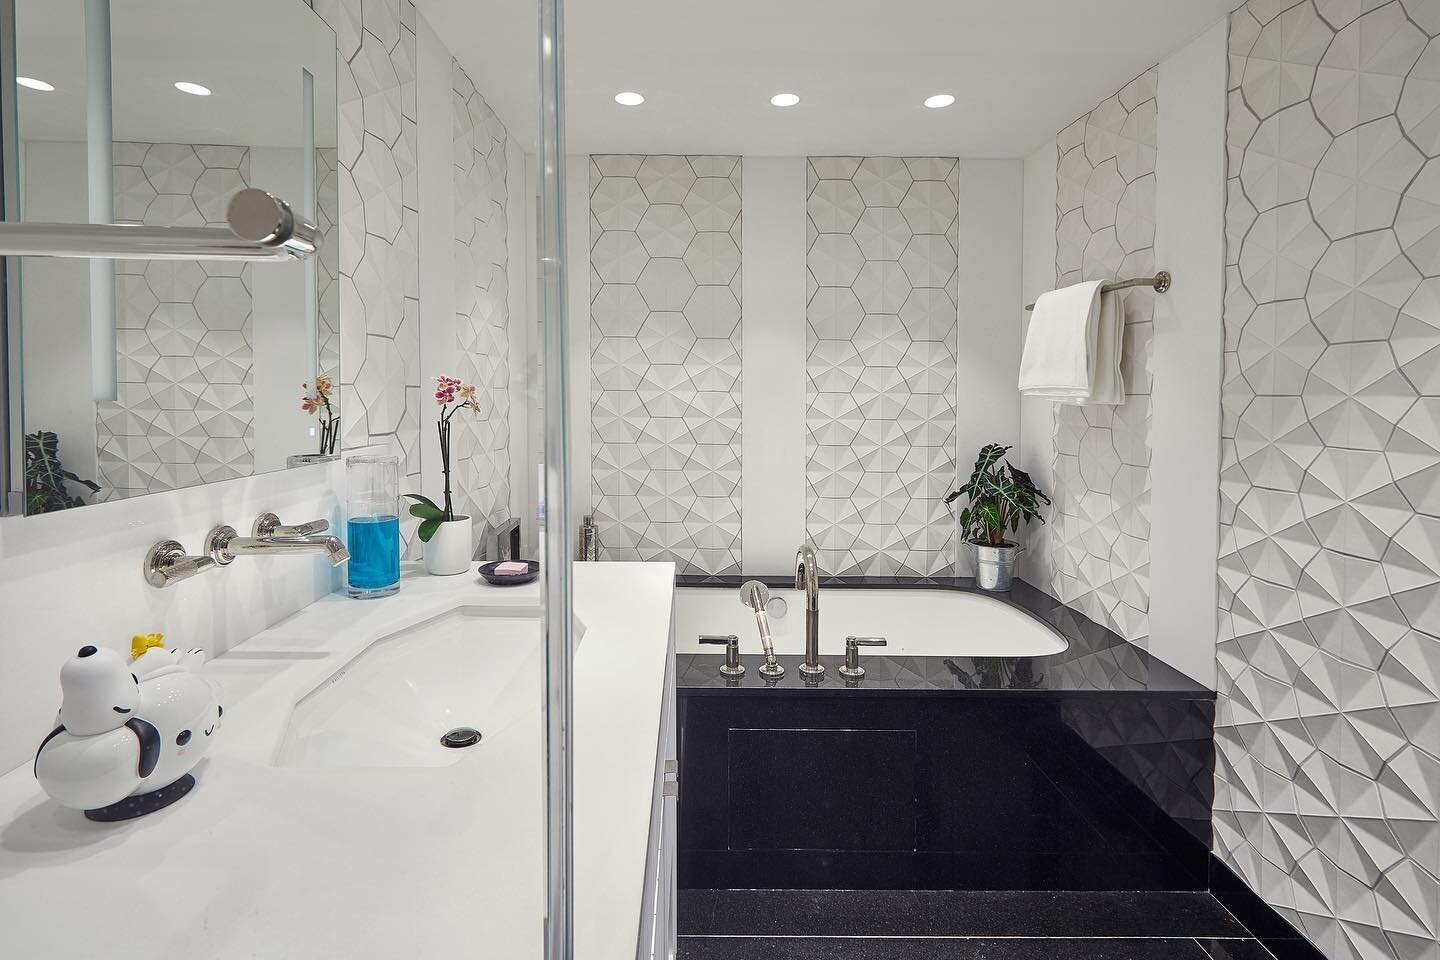 Easy like Sunday morning&hellip;.
A black and white bathroom renovation with lots of texture and interest&hellip; @annsacks tile, @kallistaplumbing fixtures&hellip;
Art @friendswithyou 
Photo by @mentistudio